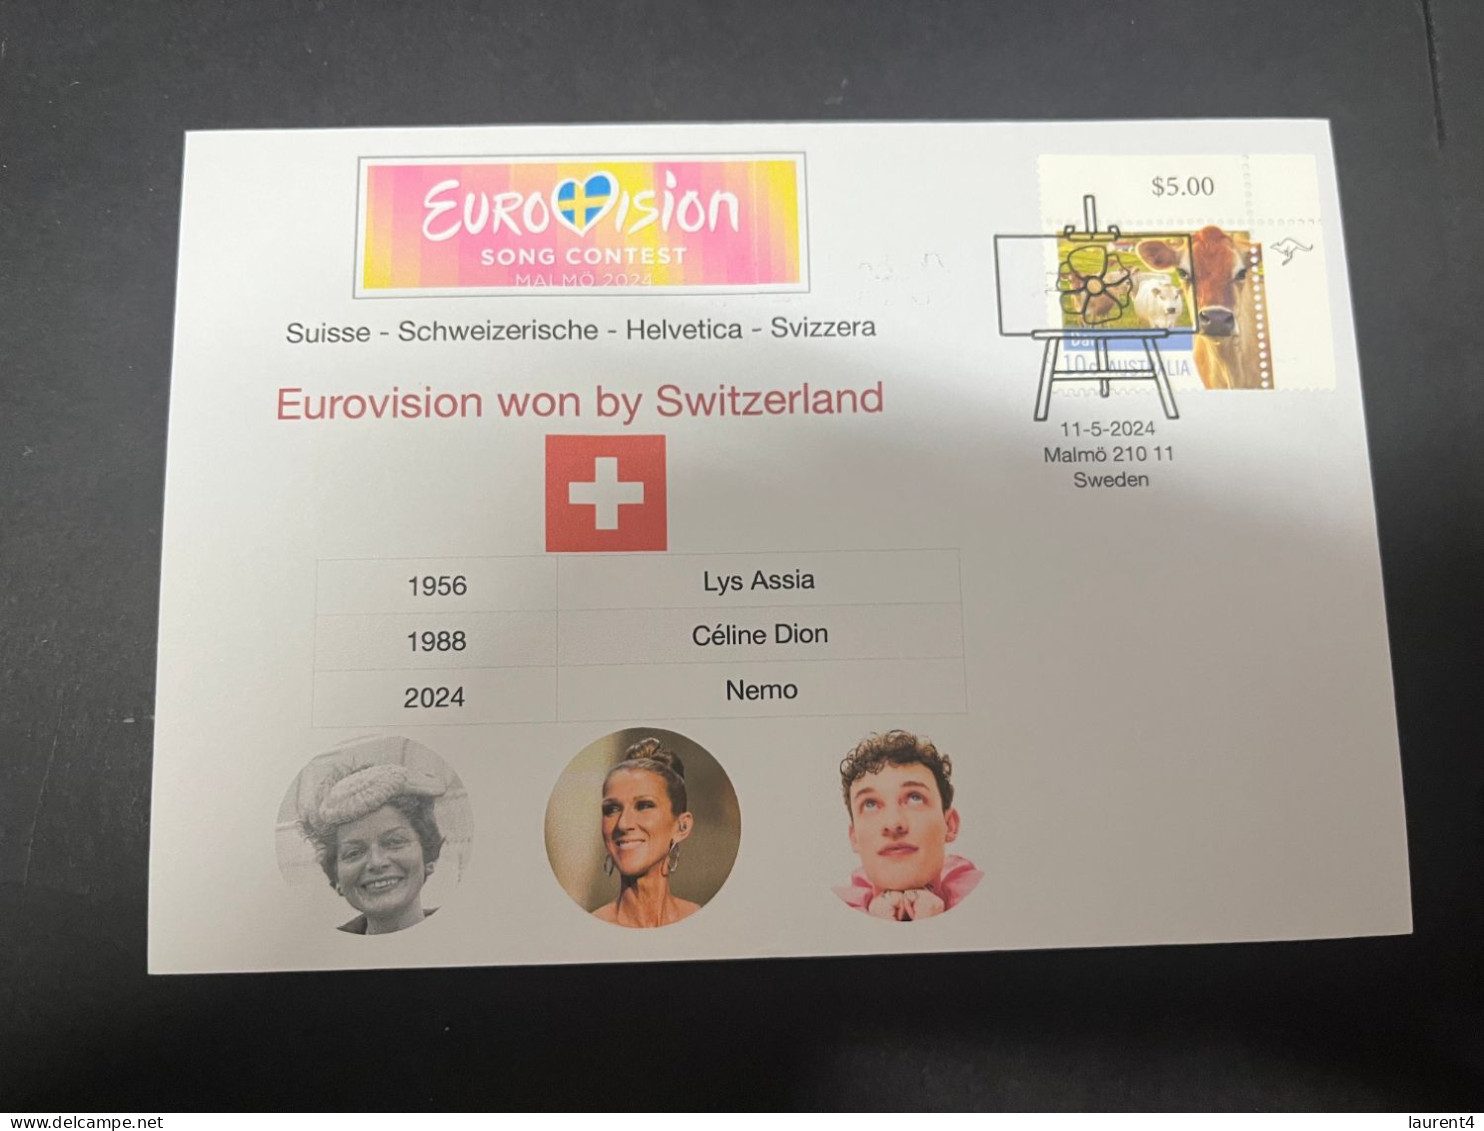 13-5-2024 (5 Z 2) Eurovision Song Contest 2024 - 1st (3rd Win For Switzerland) 1956 Lys Assia - 1988 Céline Dion - Music